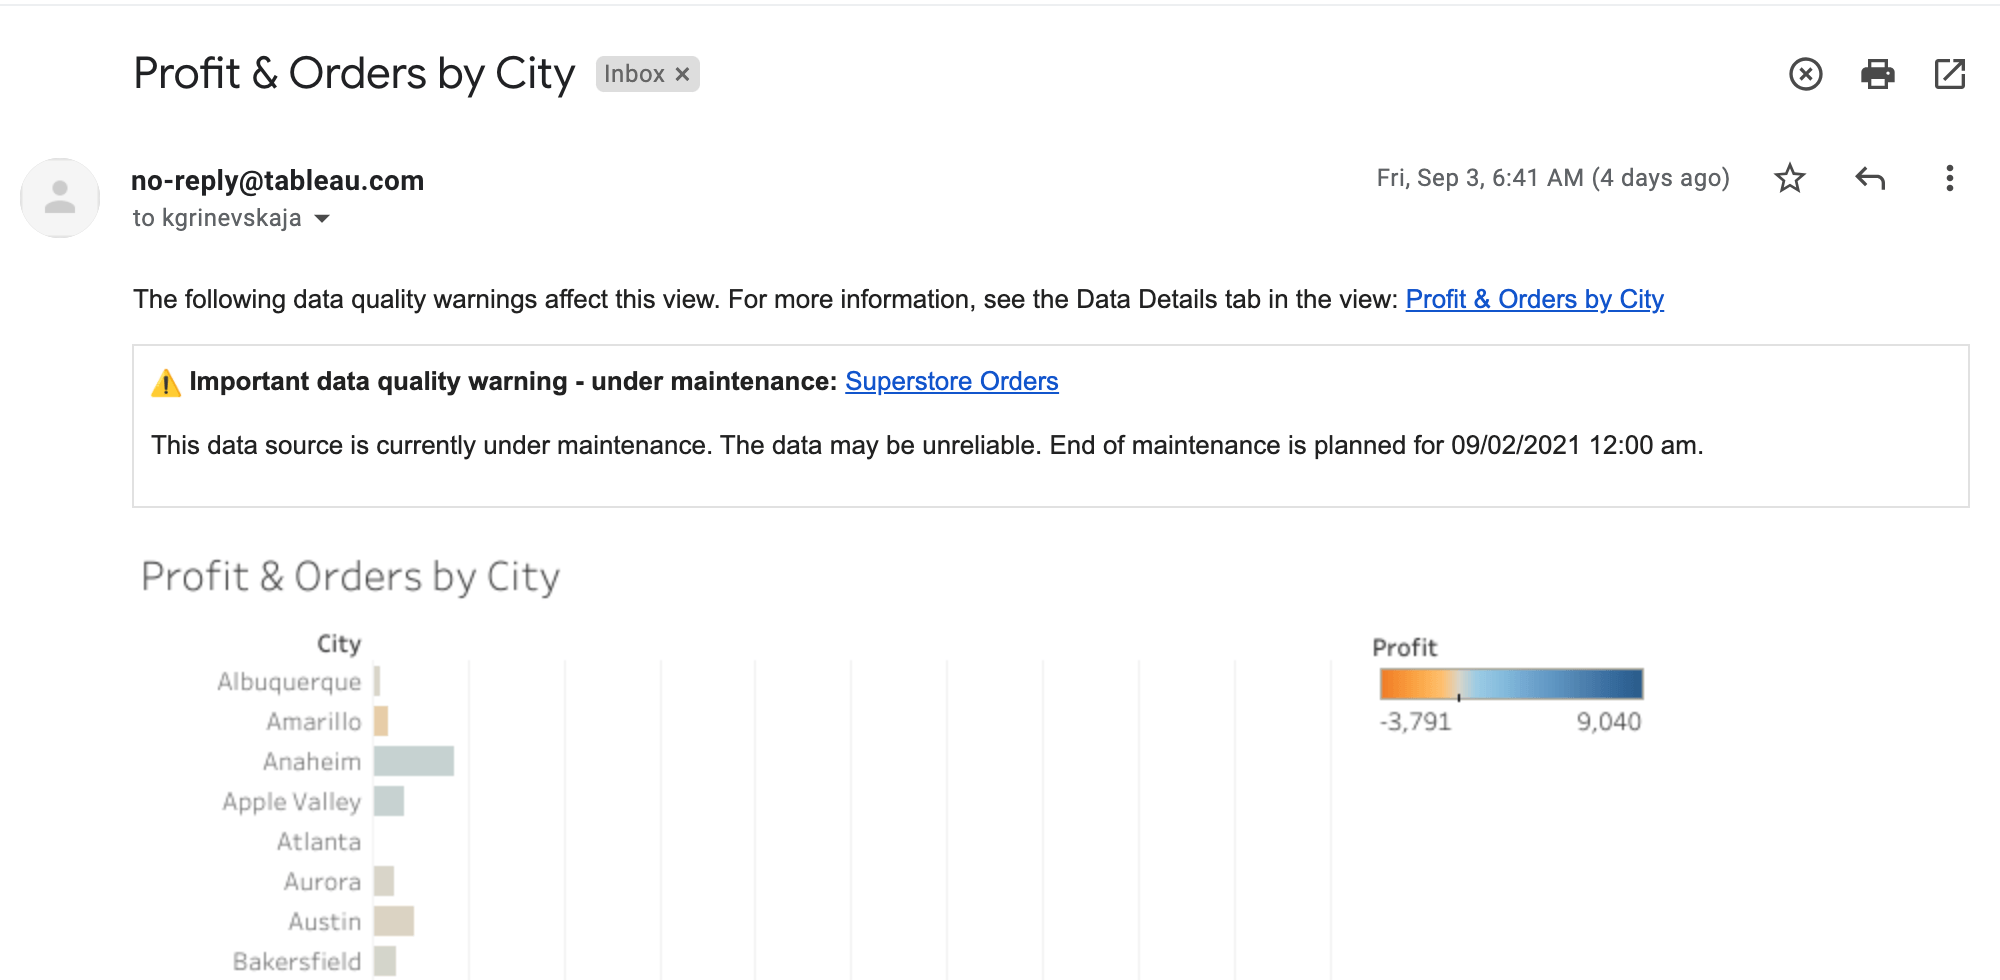 An email subscription from a Tableau Dashboard displays a data quality notice to alert the recipient that the data source is under maintenance and the data may be unreliable.